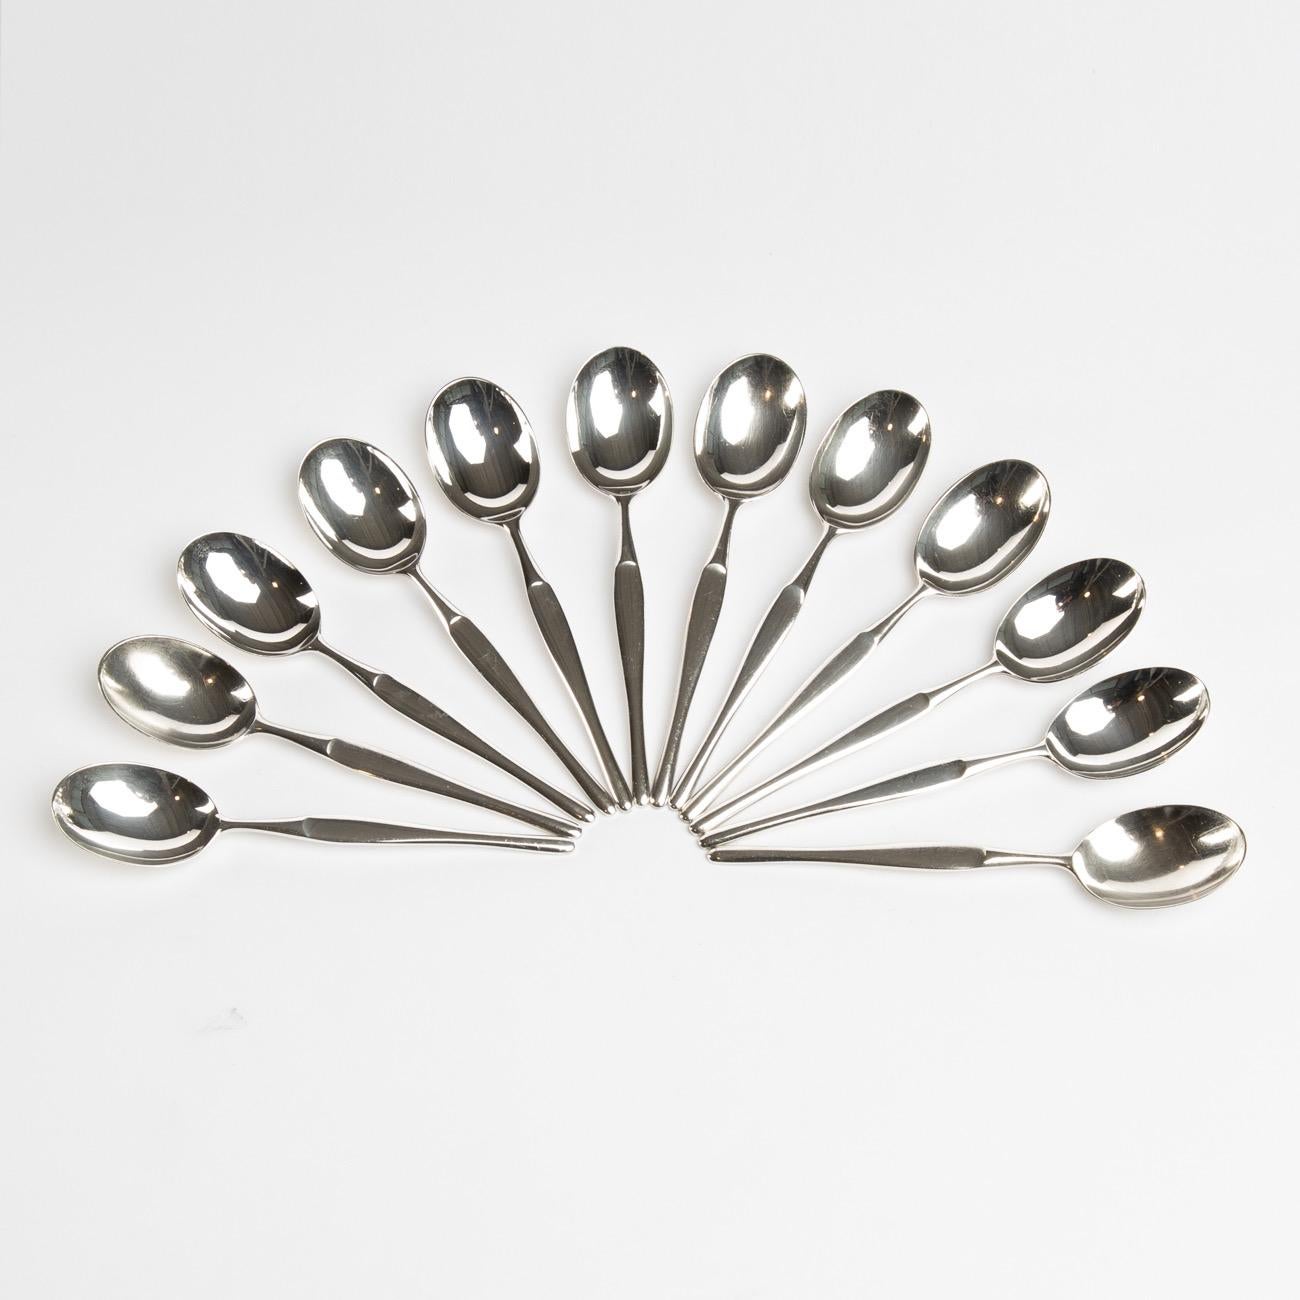 Mid-20th Century Duo, Silver-Plated Metal Flatware Set for 12 People, Tapio Wirkkala, Christofle For Sale